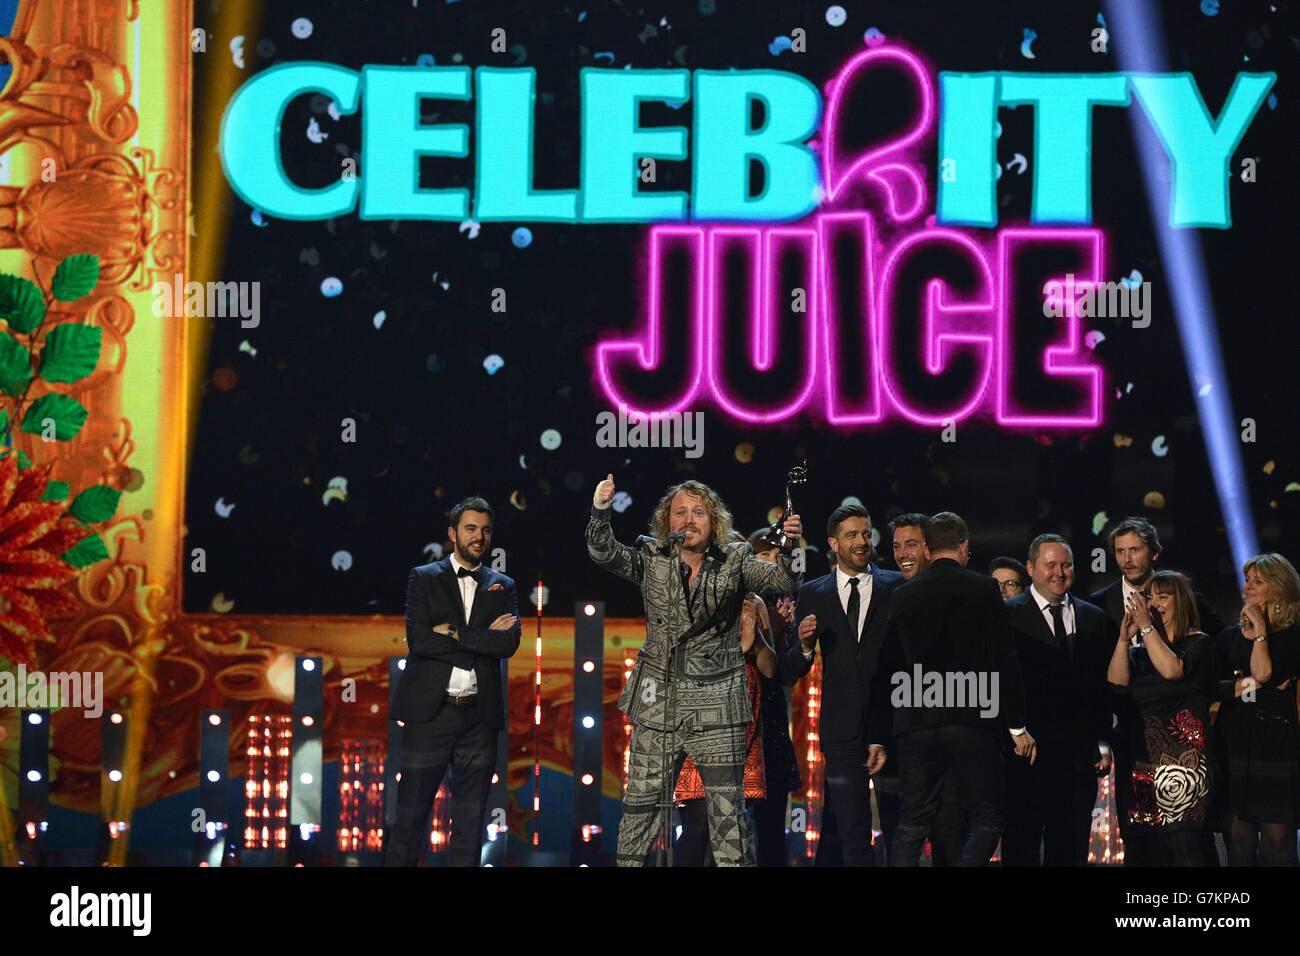 Leigh Francis accepts the Multi Channel Award for Celebrity Juice during the 2015 National Television Awards at the O2 Arena, London. Stock Photo